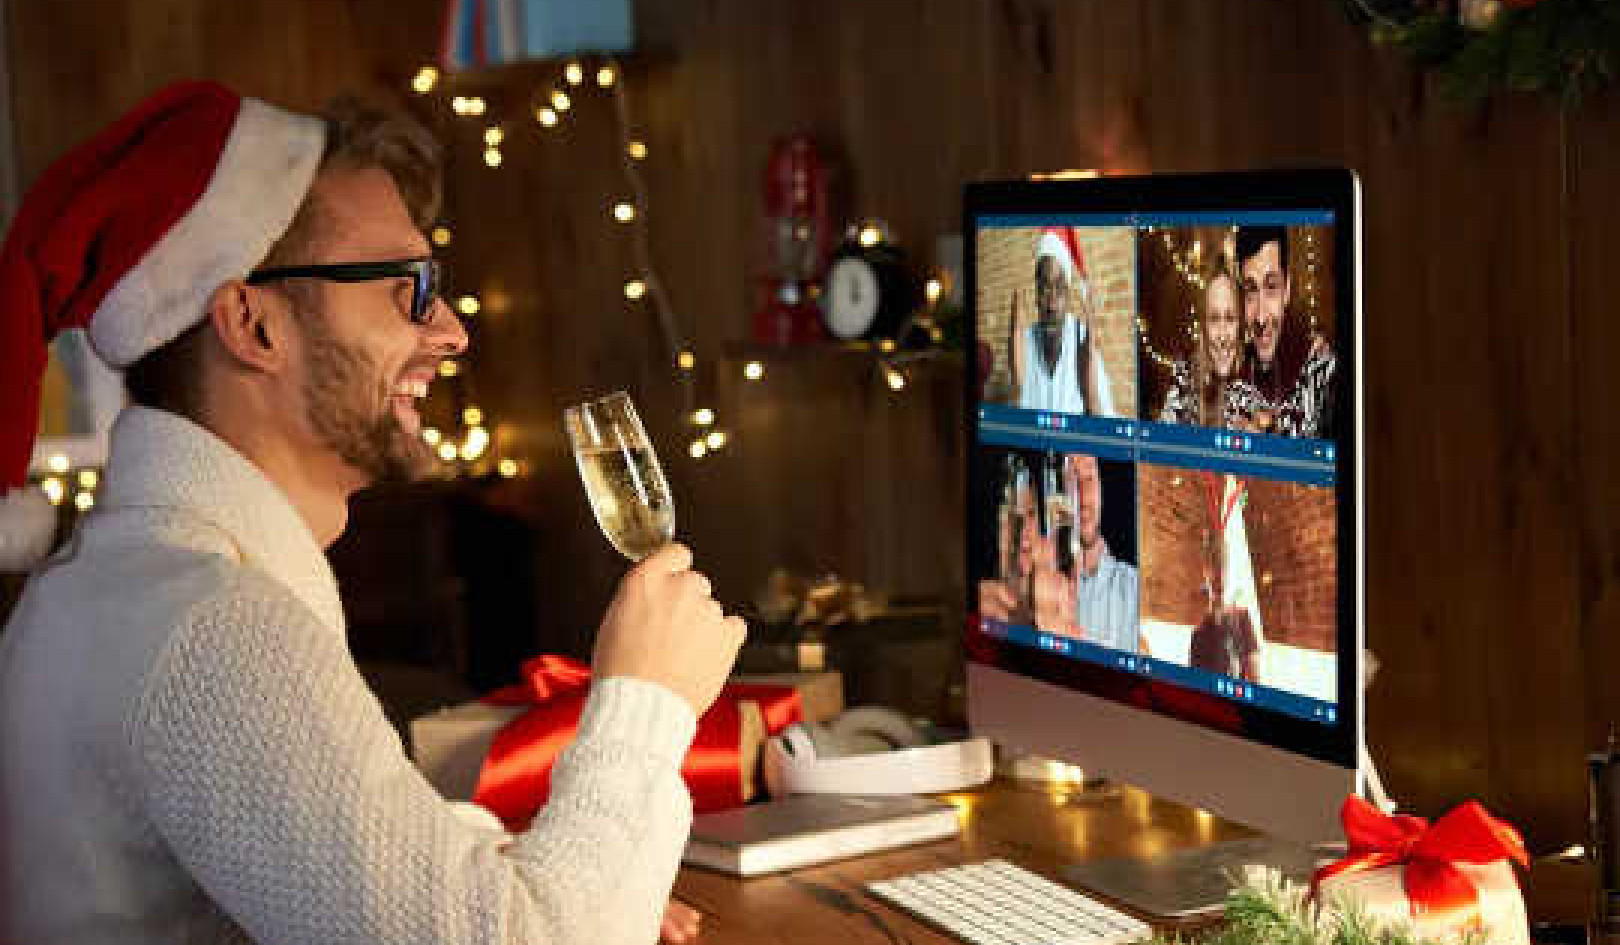 Christmas Will Be Different This Year But It's Important To Celebrate Together, Even Online